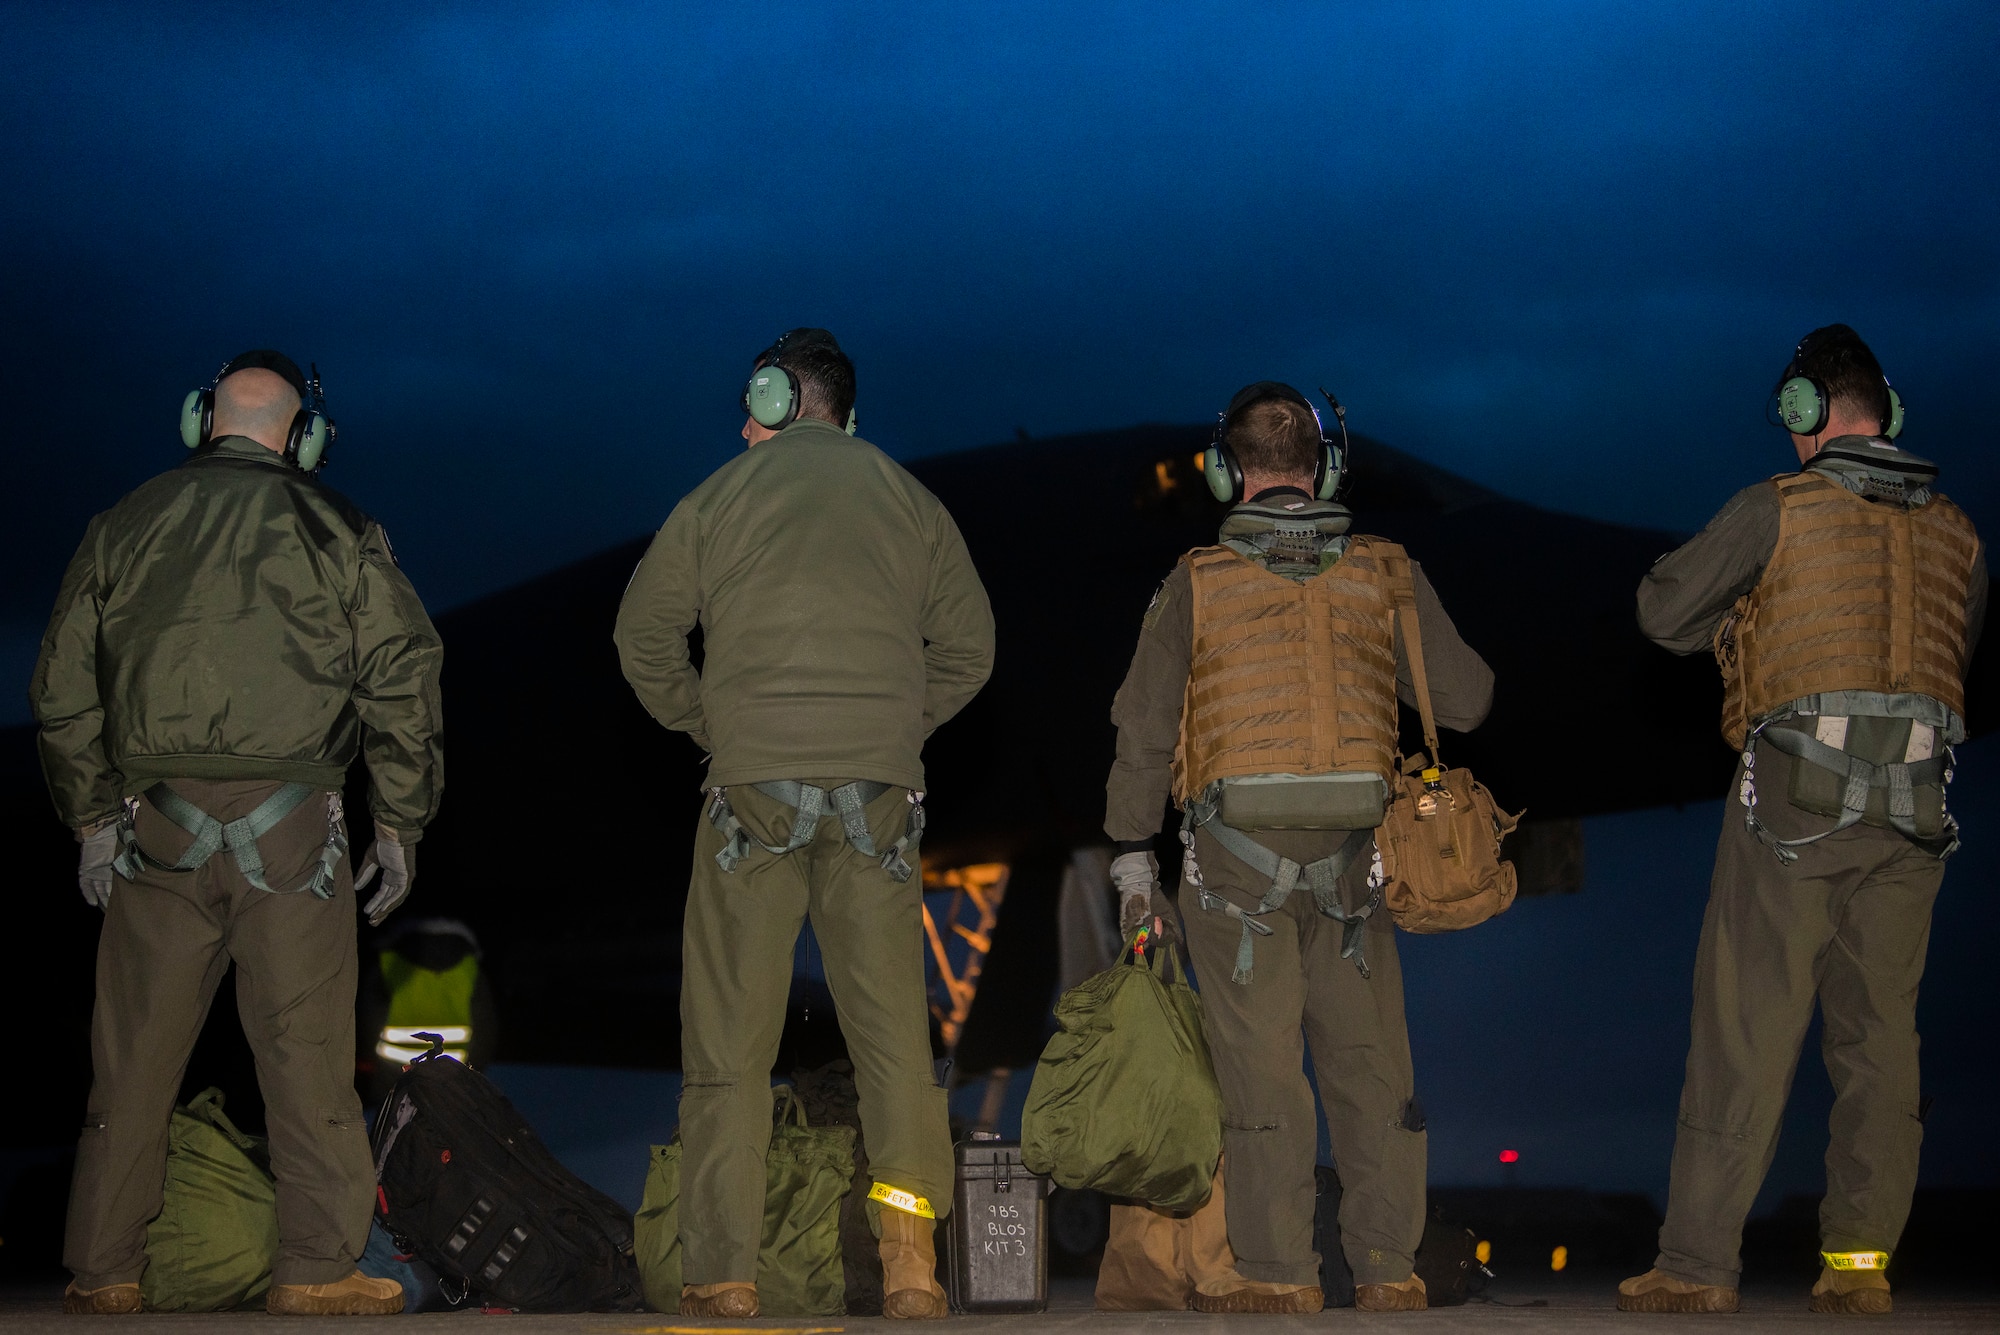 Aircrew assigned to the 9th Expeditionary Bomb Squadron wait to board a B-1B Lancer at Ørland Air Force Station, Norway, March 12, 2021. The B-1 was refuelled using a hot-pit ground refuelling method before taking off to conduct close air support training at the Setermoen range in northern Norway where the aircrew integrated with U.S. Marine and Norwegian Joint Terminal Attack Coordinators. (U.S. Air Force photo by Airman 1st Class Colin Hollowell)